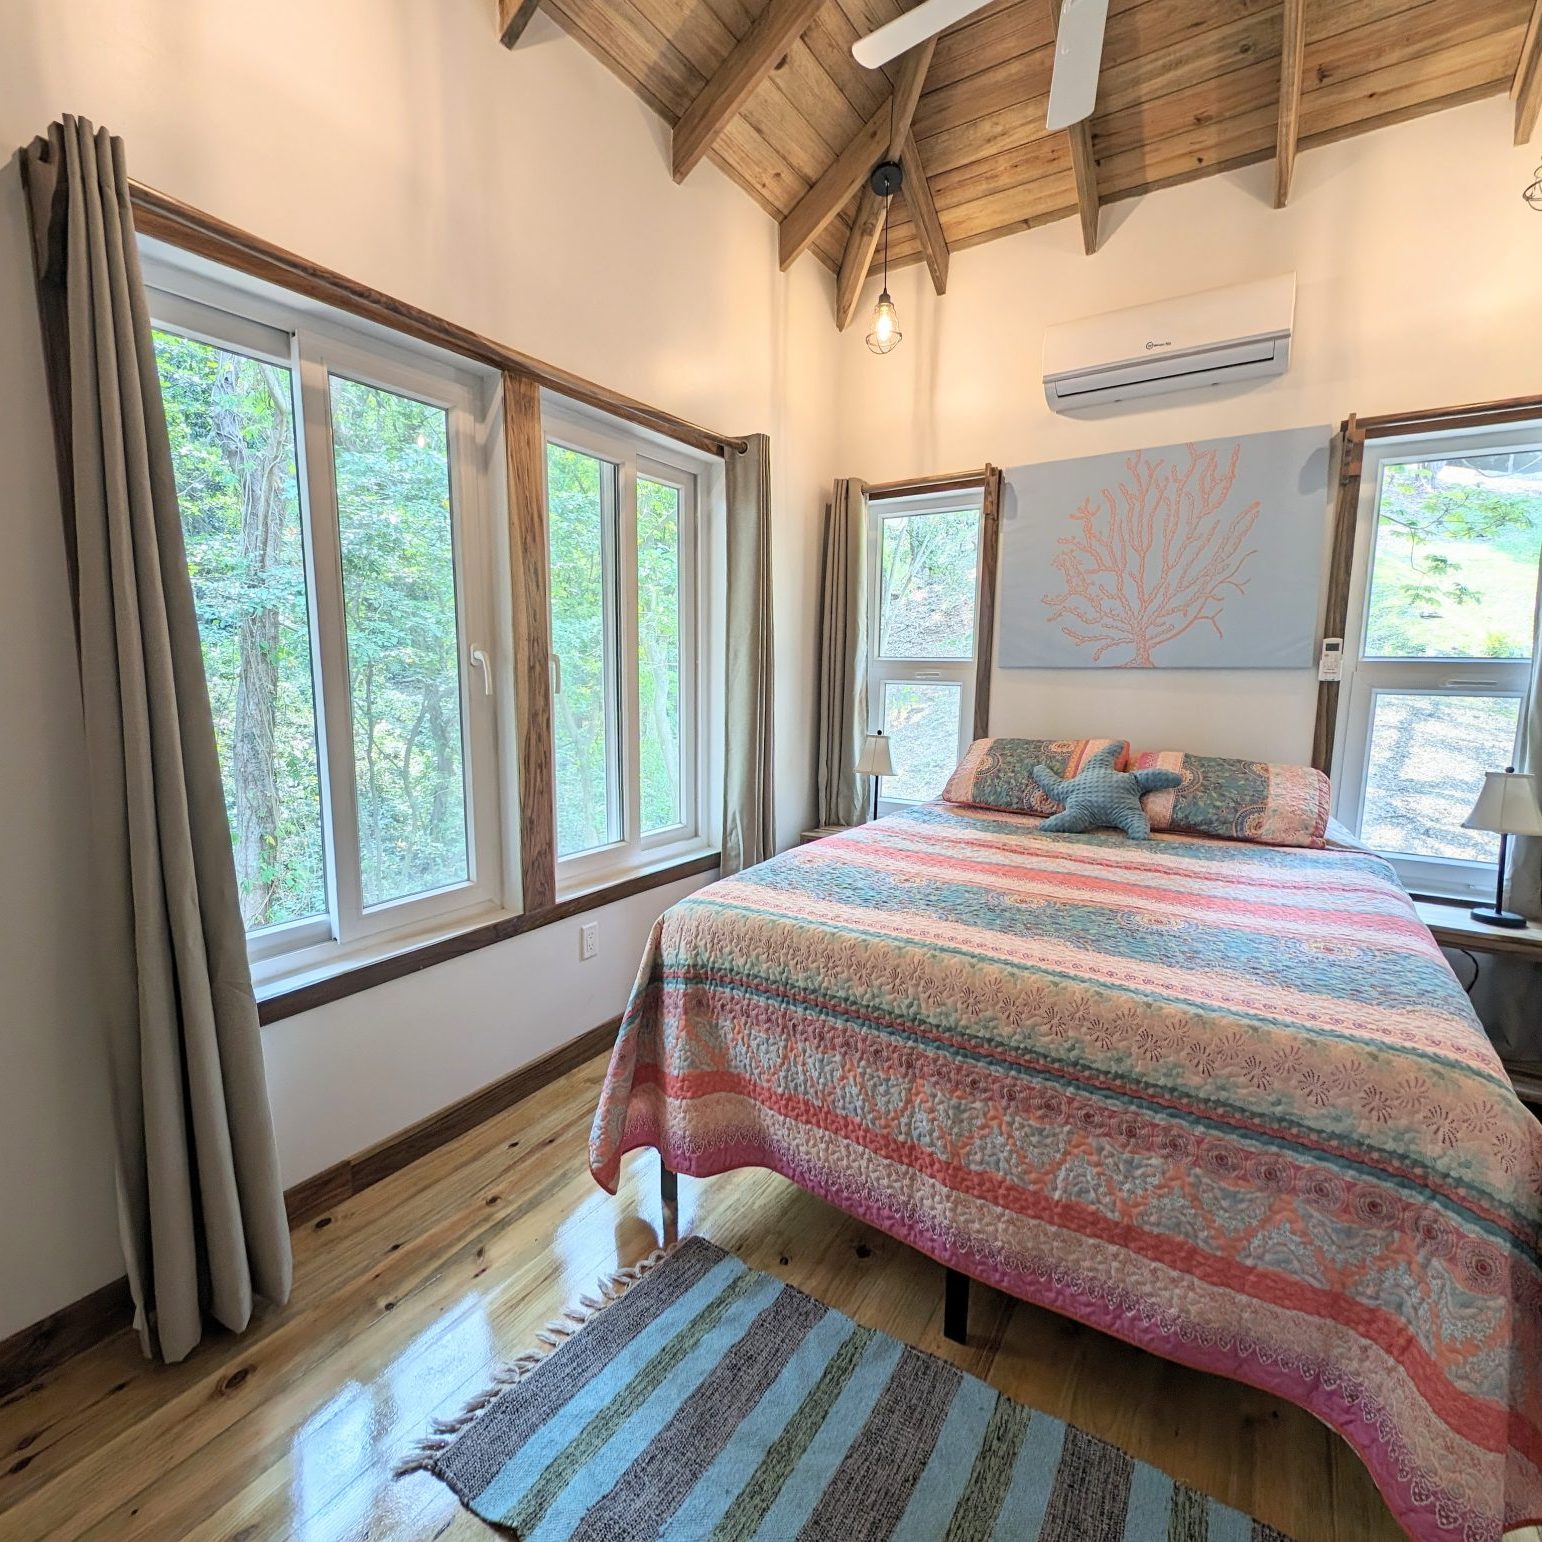 Jungle side bedroom of beach rental home has lush forest views